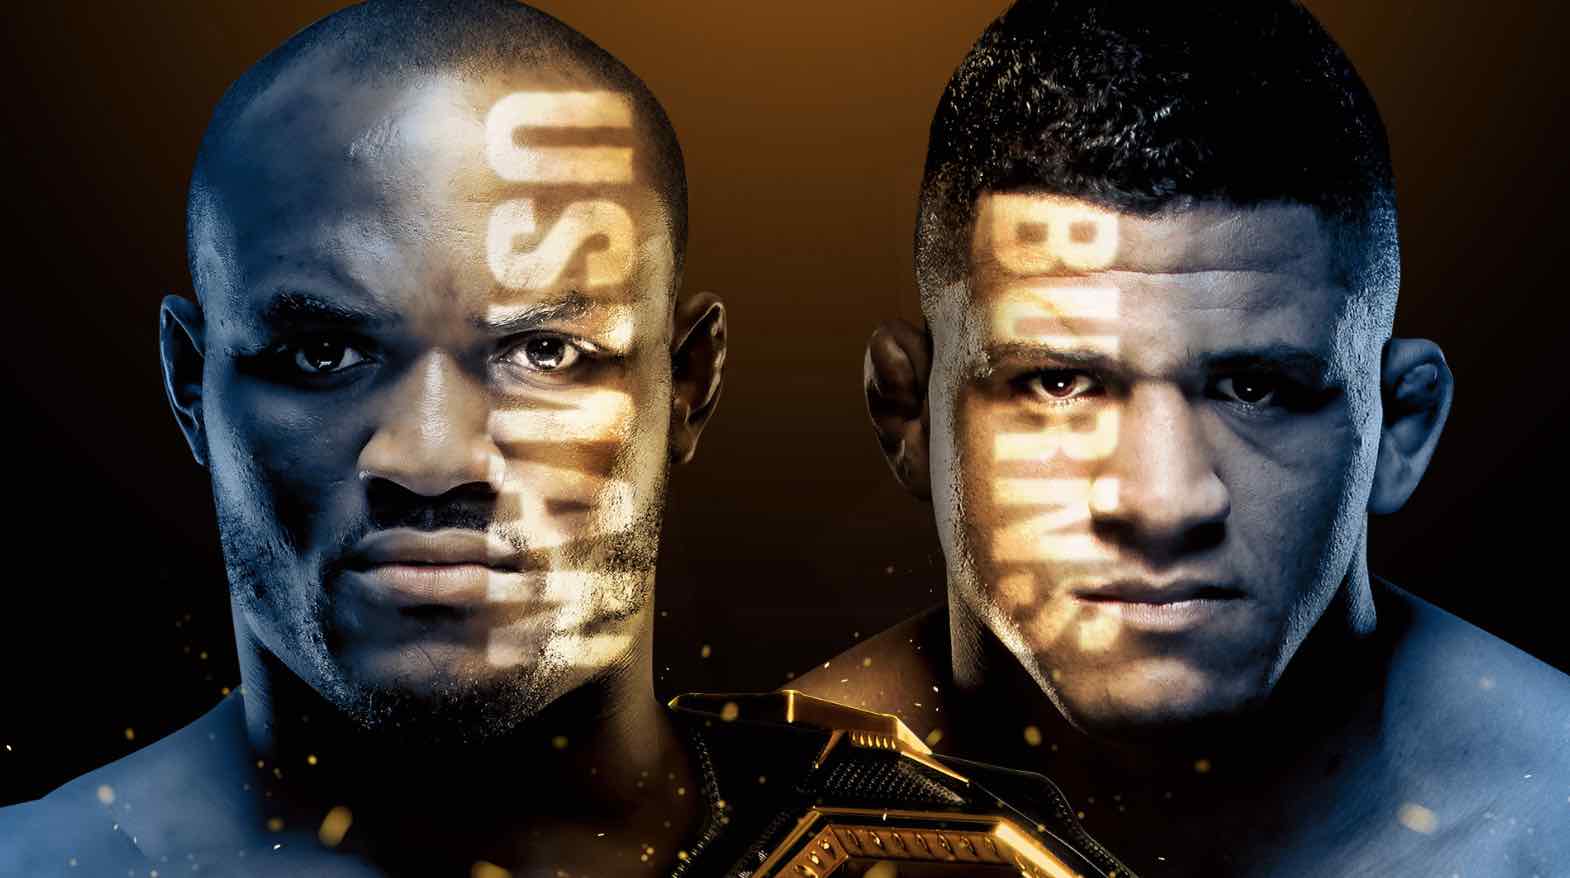 How to watch UFC 258 Usman vs Burns welterweight title bout